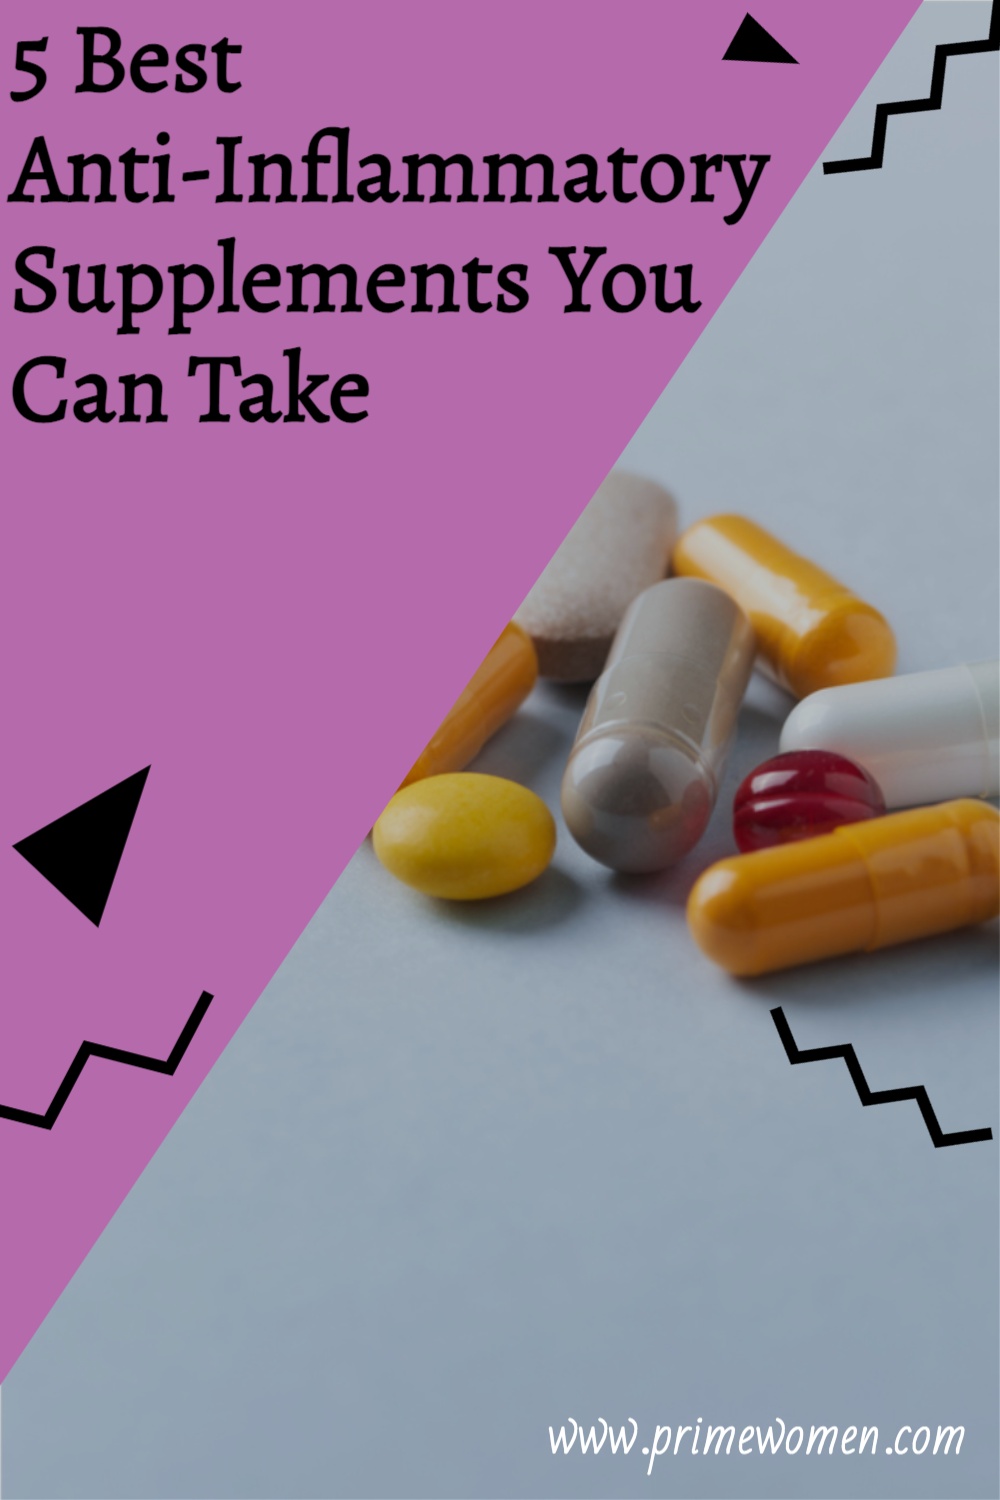 5-Best-Anti-Inflammatory-Supplements-You-Can-Take